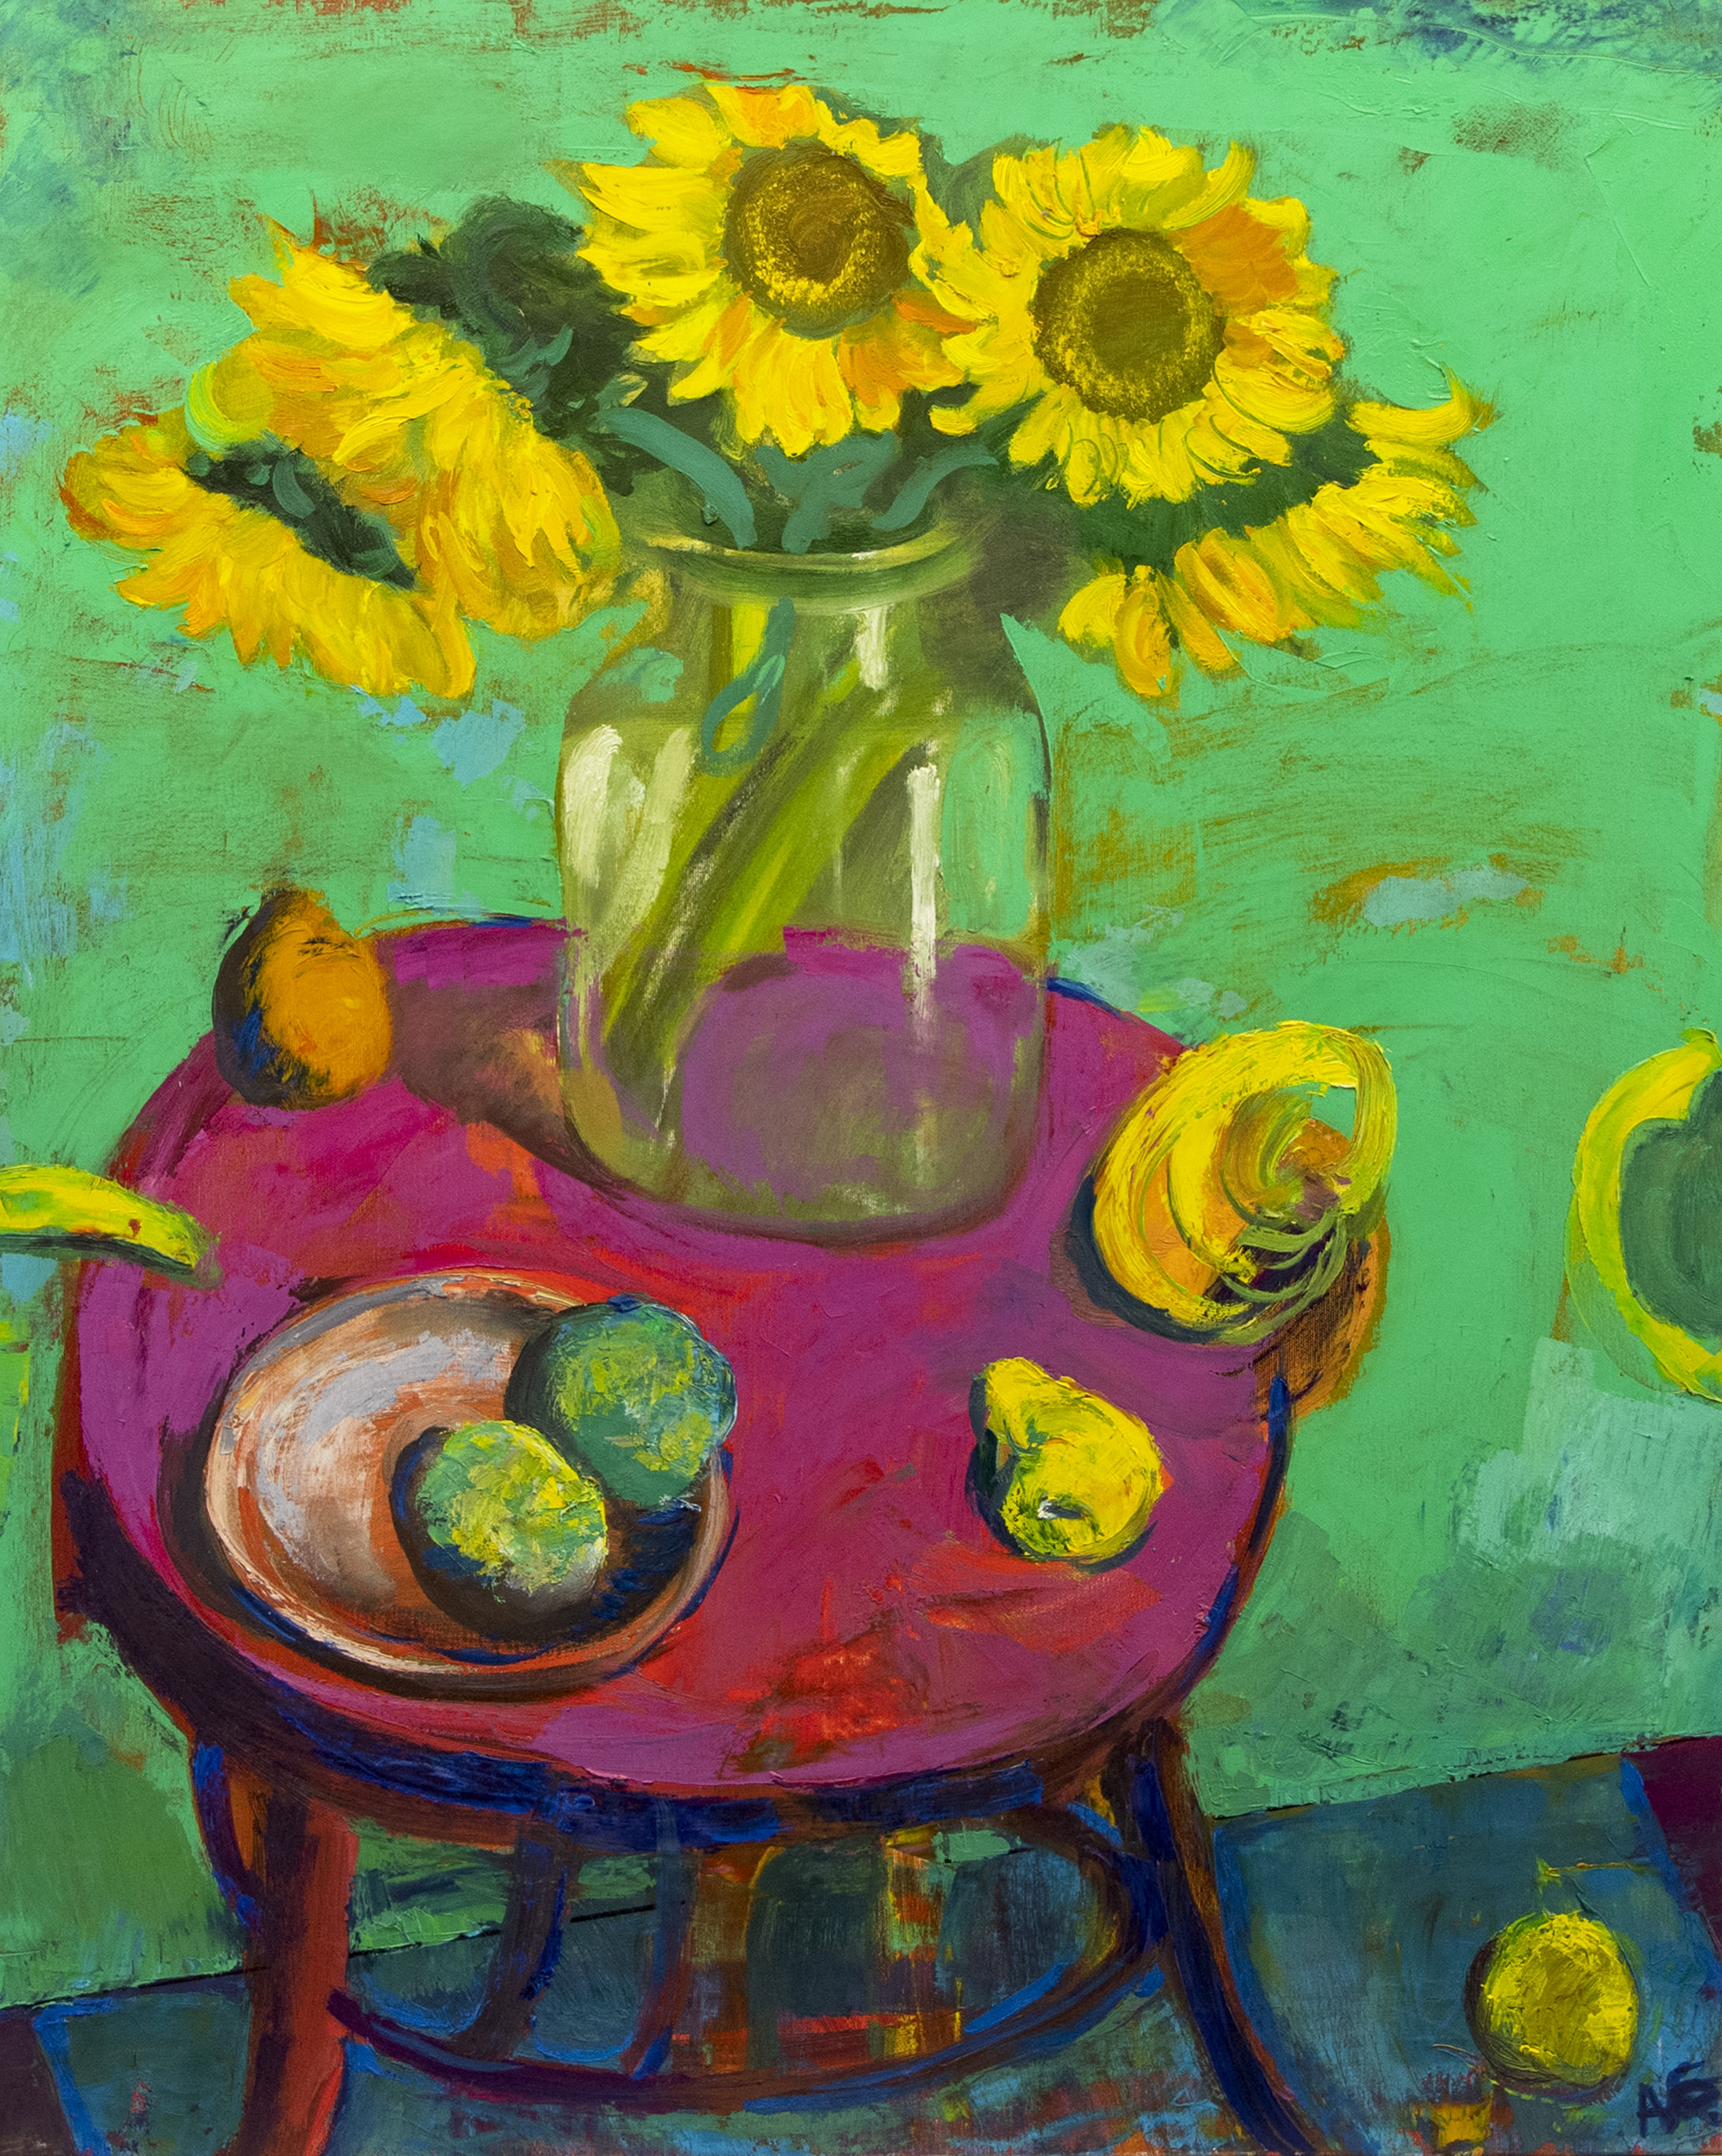 SUNFLOWERS, AN OIL BY ANDREI BLUDOV